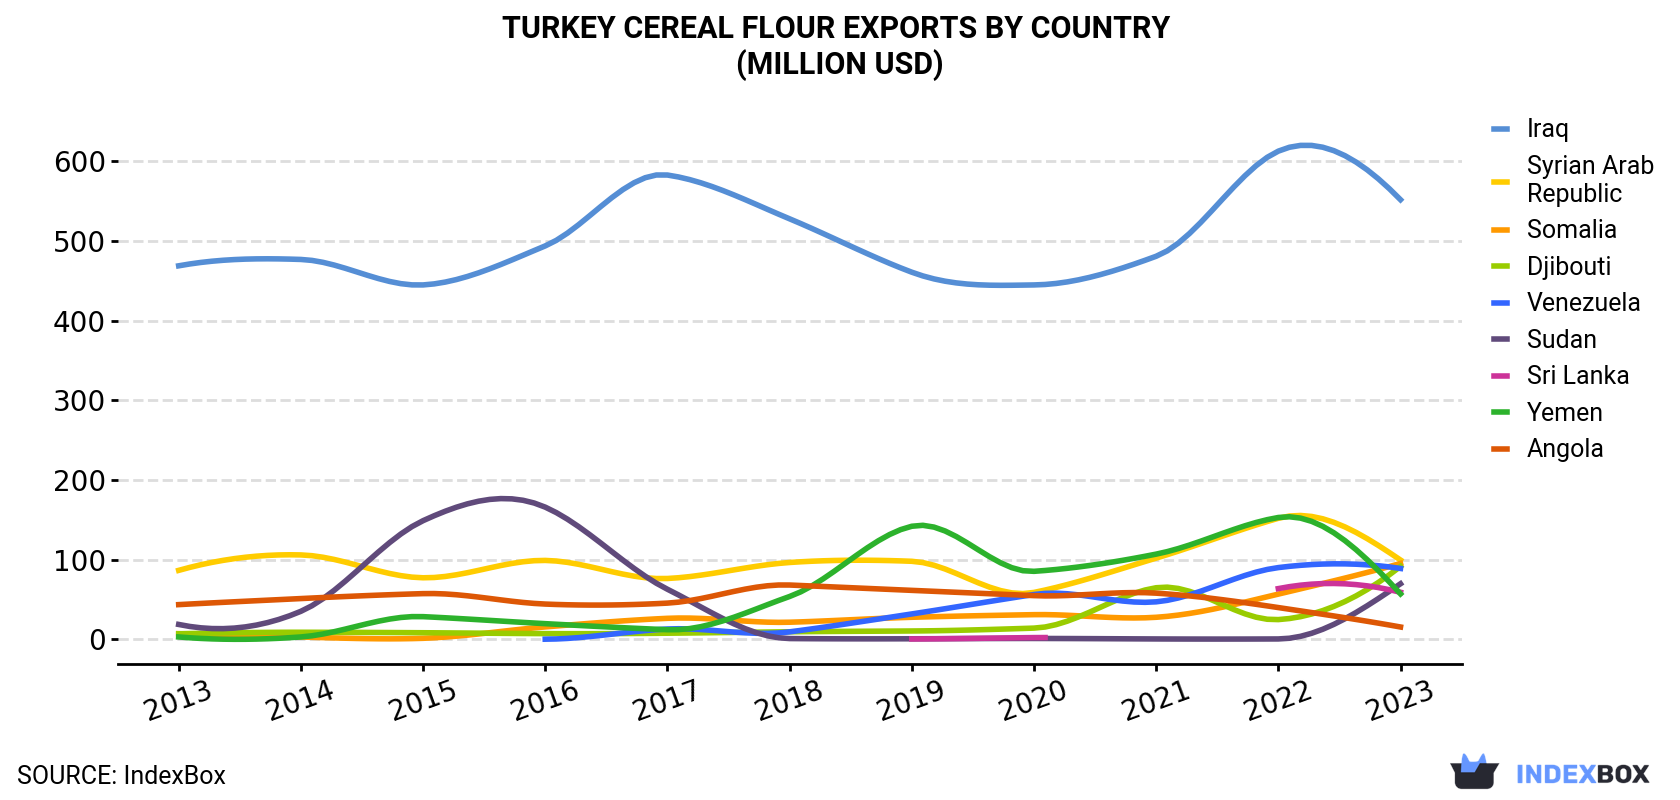 Turkey Cereal Flour Exports By Country (Million USD)